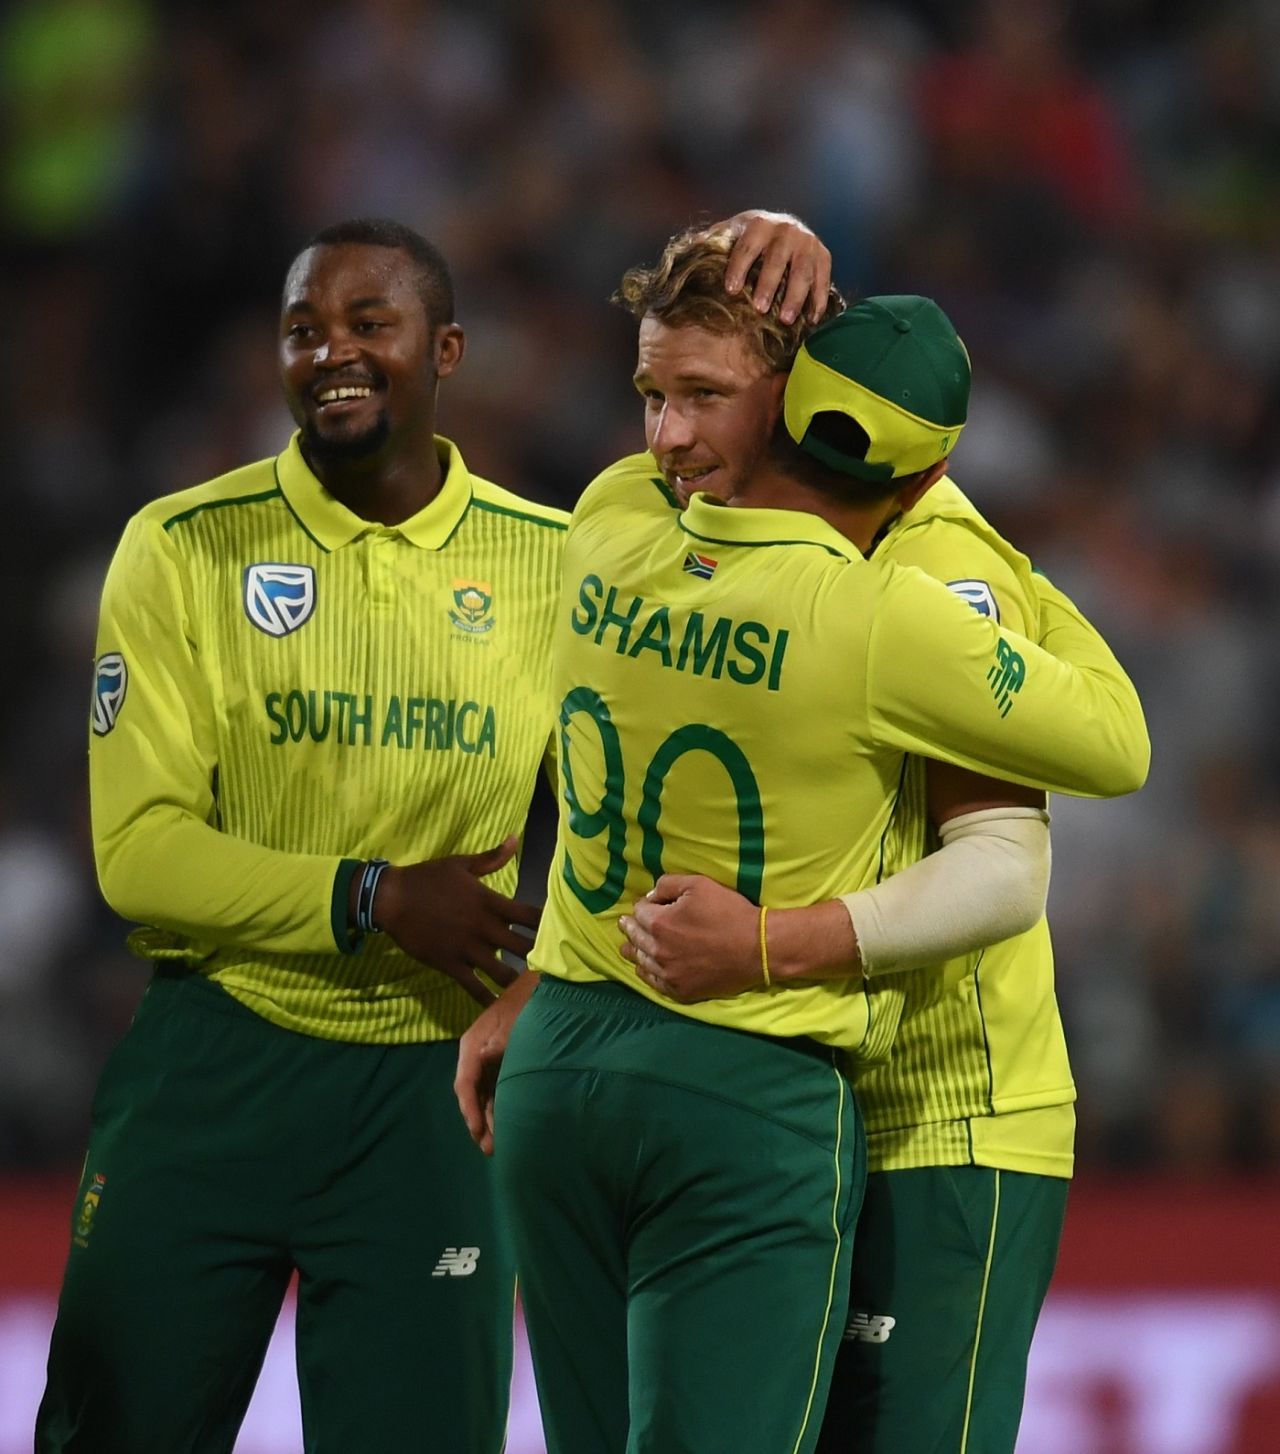 Miller led South Africa to a narrow win in his first game in charge, South Africa v Pakistan, 2nd T20I, Johannesburg, February 3, 2019